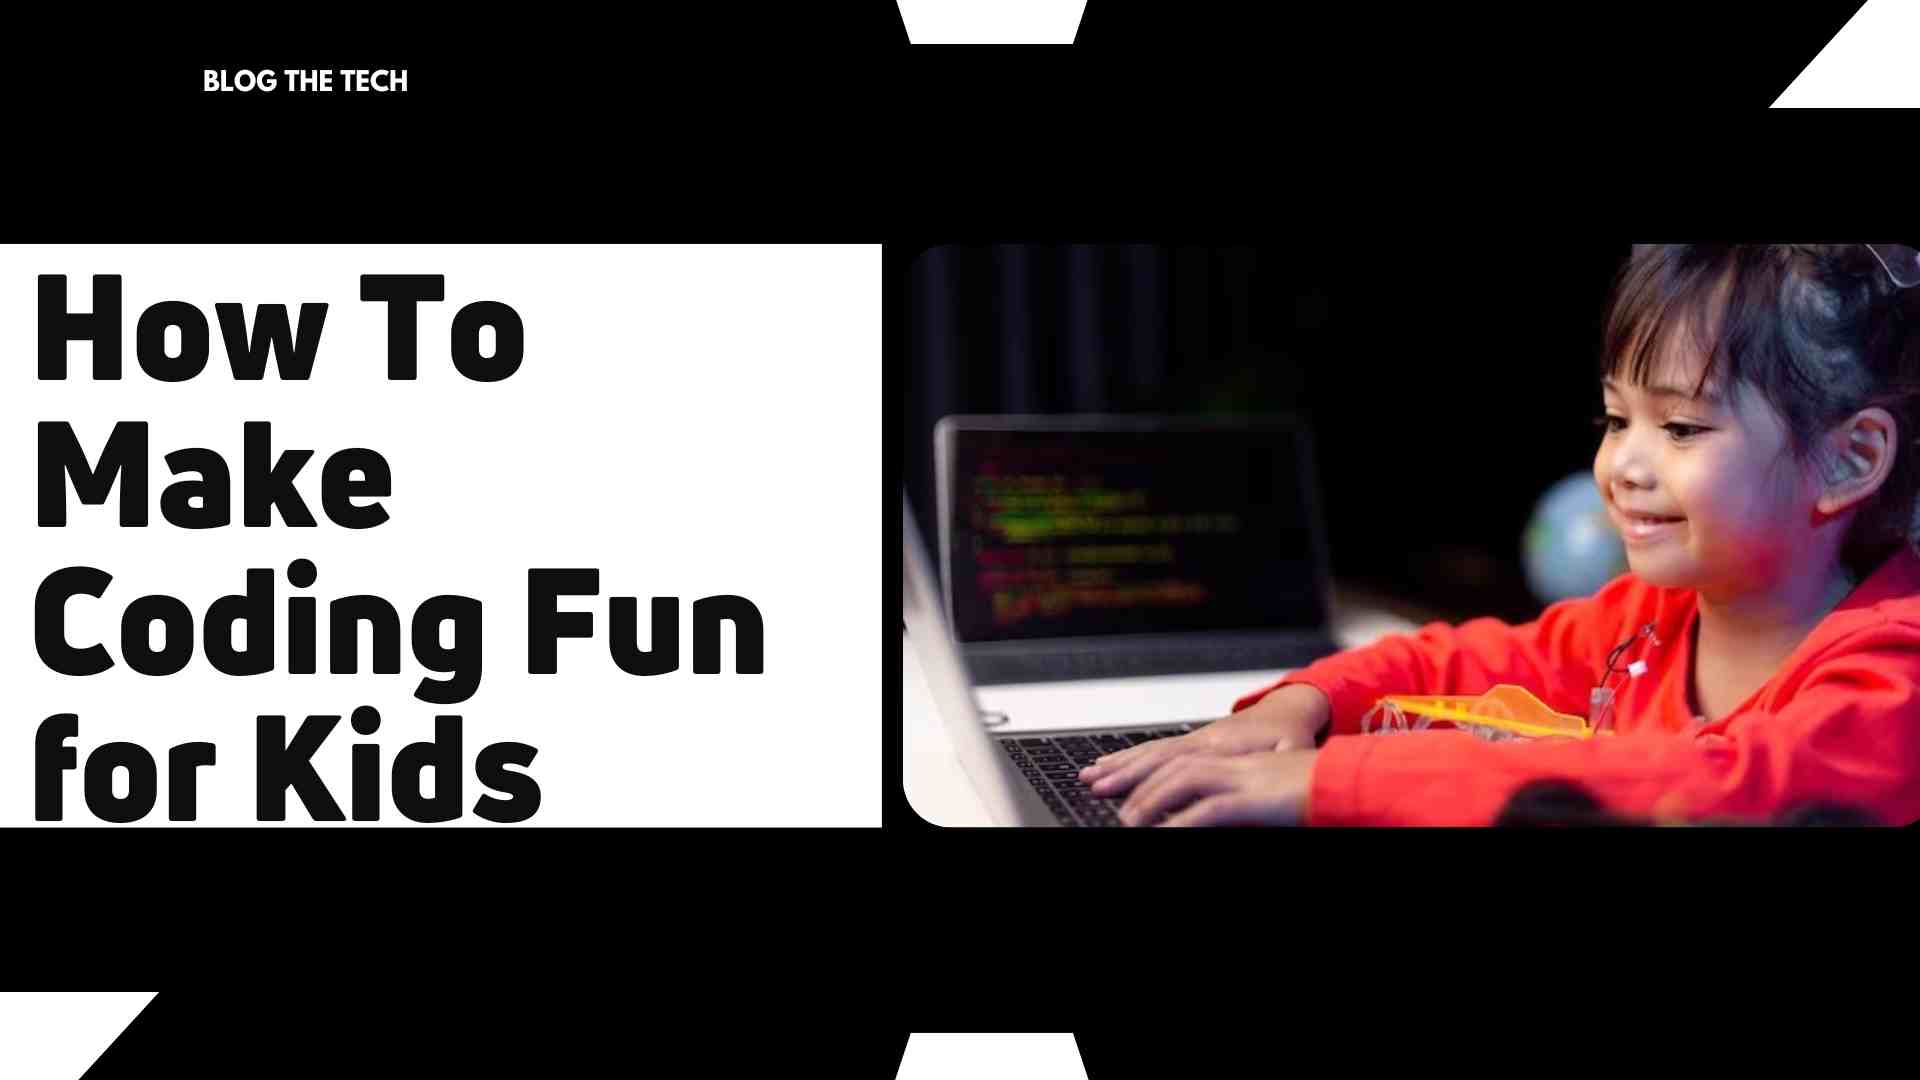 How To Make Coding Fun for Kids